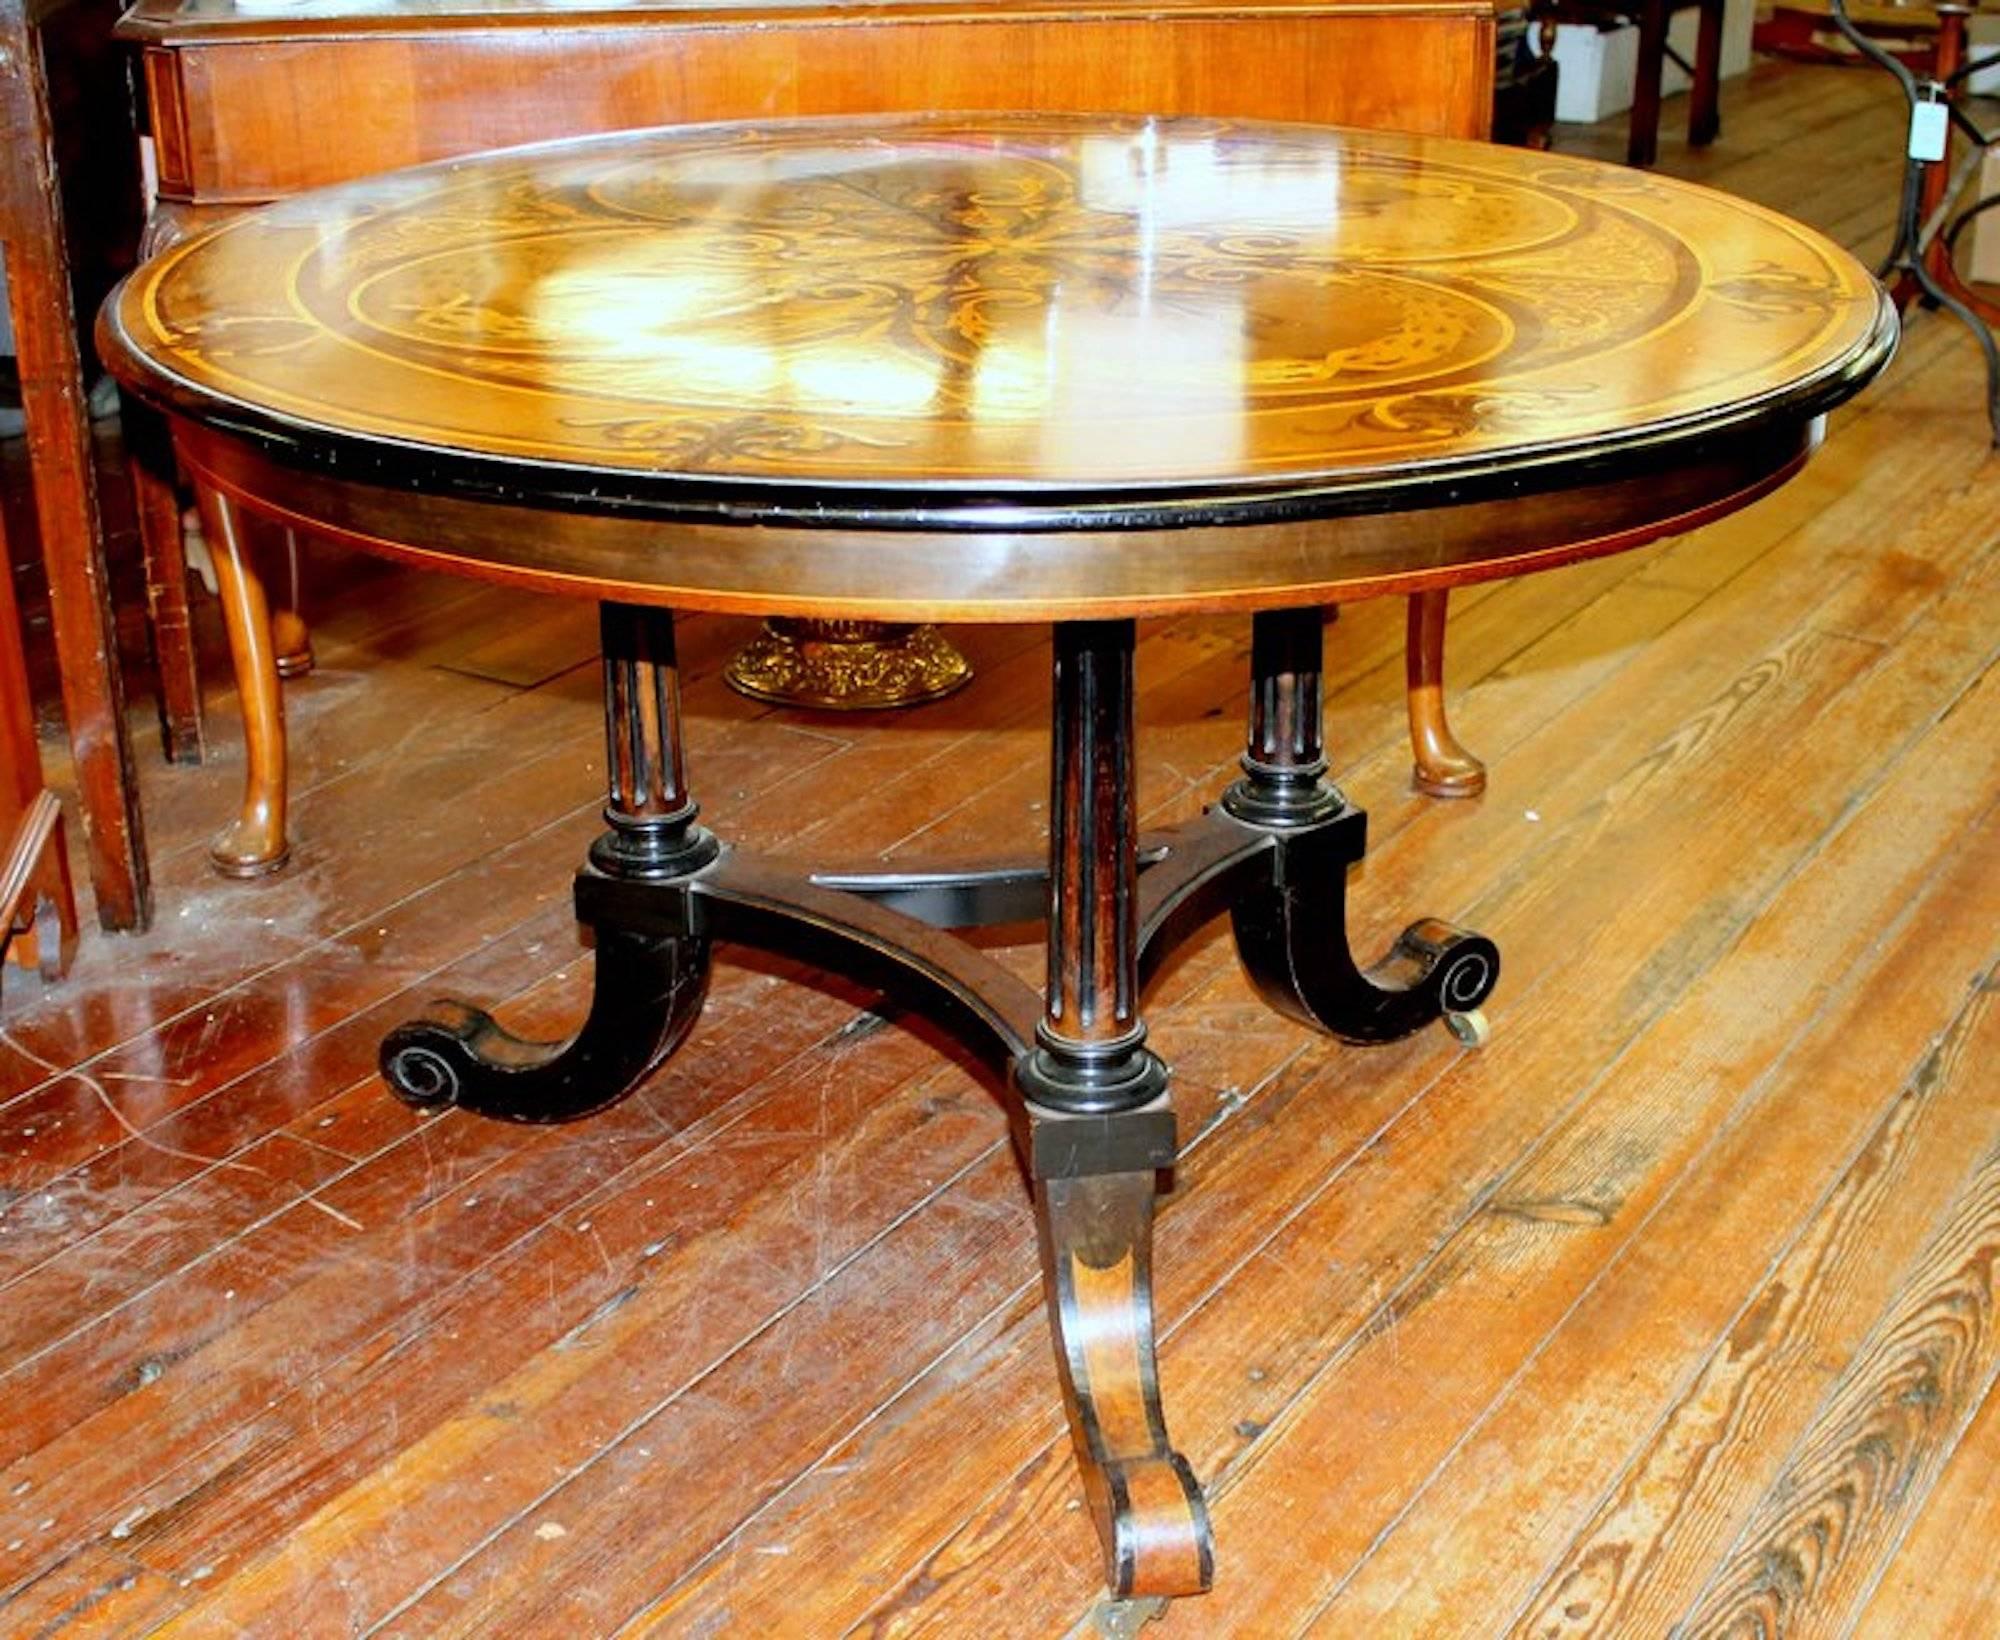 Remarkably rare and important antique English marquetry inlaid specimen or centre table, aesthetic movement.

Please note ebonized legs and base against a burr walnut veneer with six different 